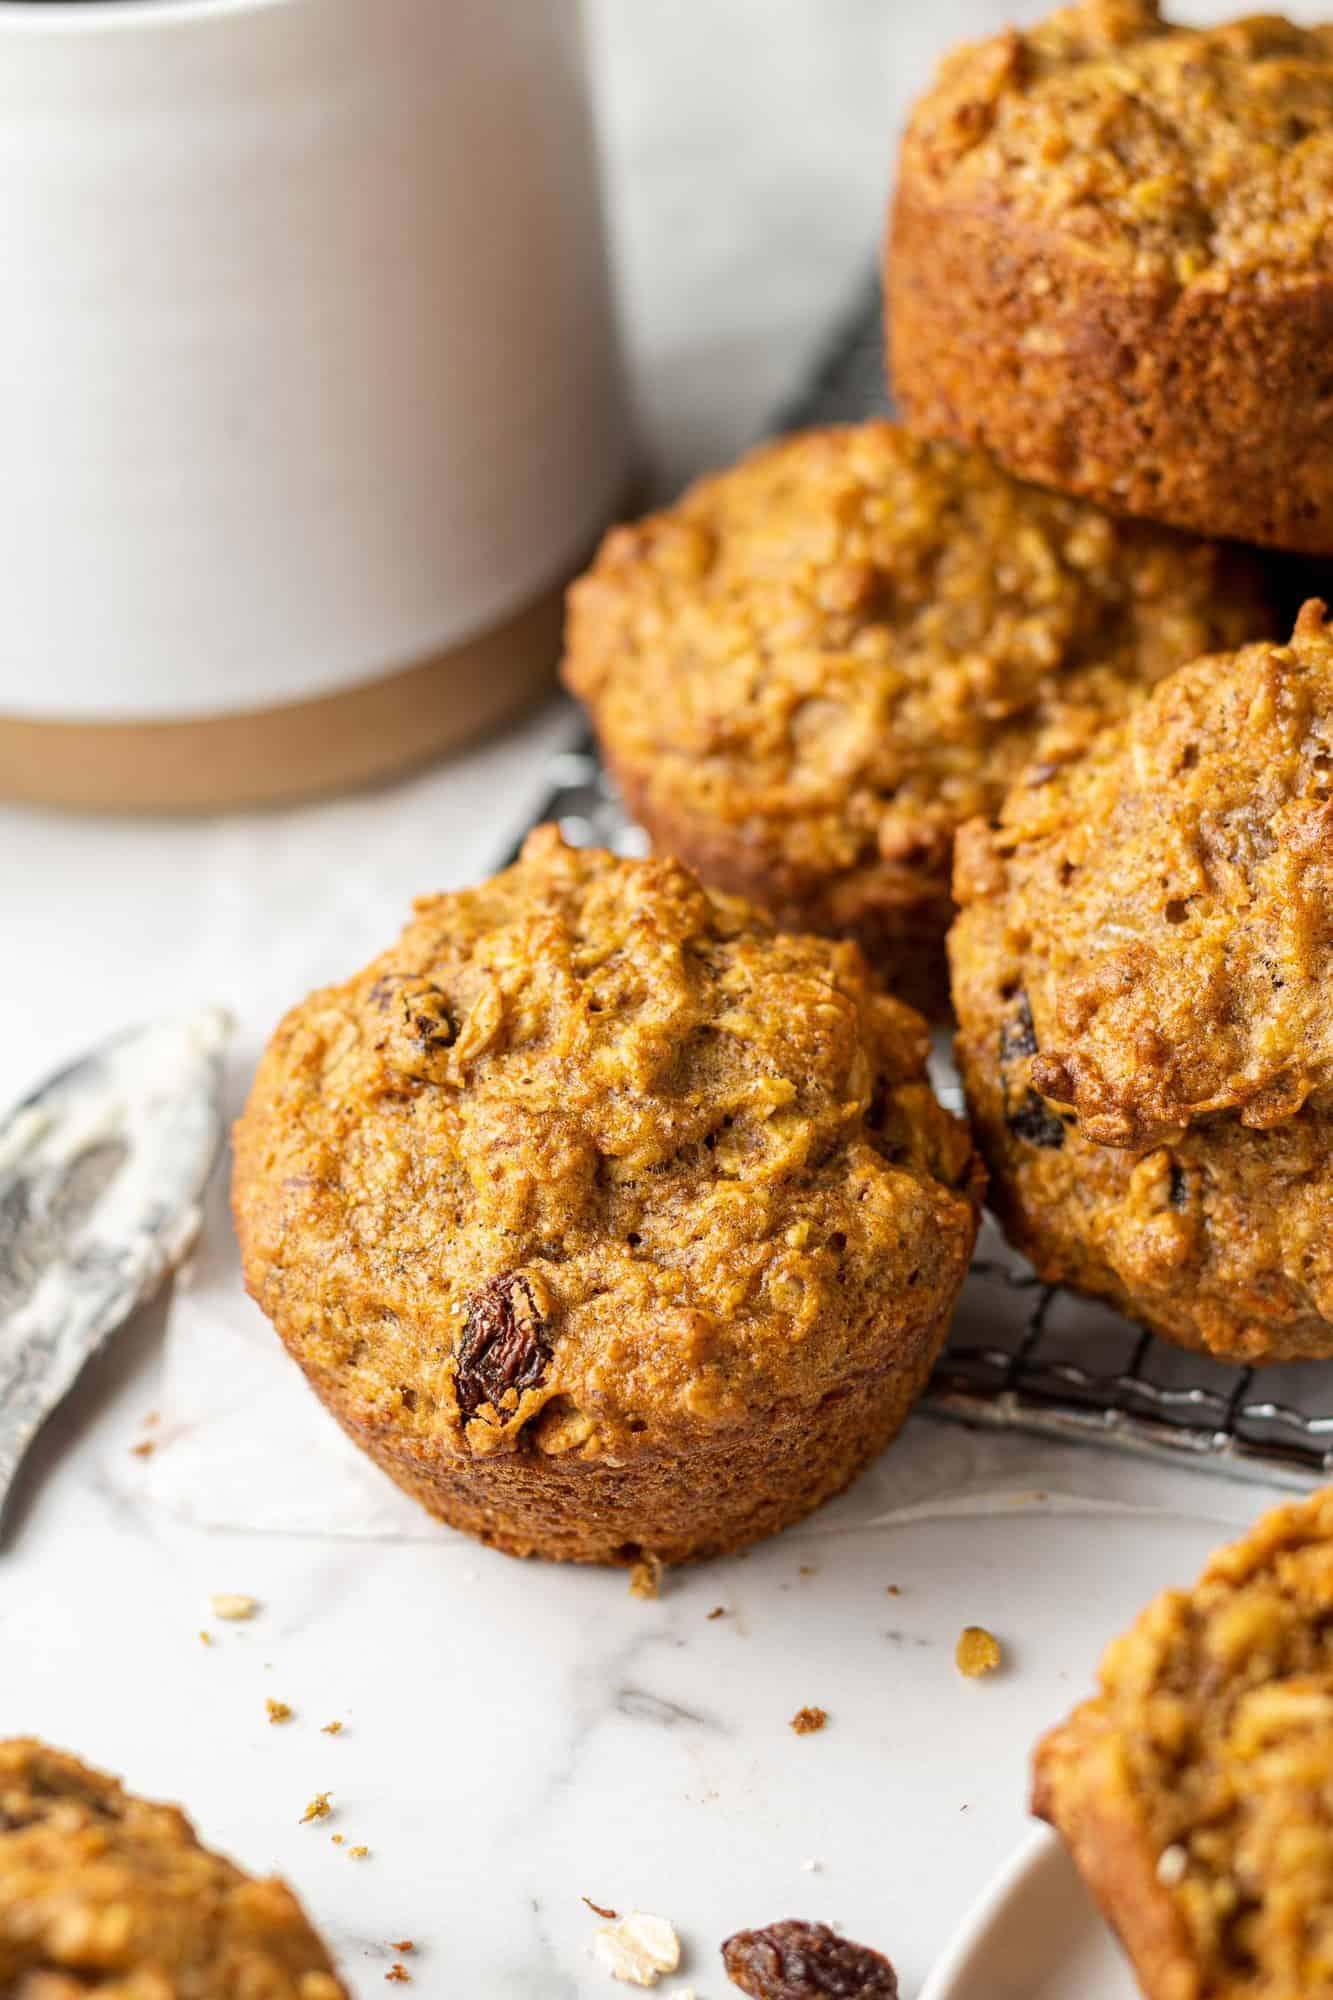 Pile of carrot raisin muffins on a white surface with a mug in the background.